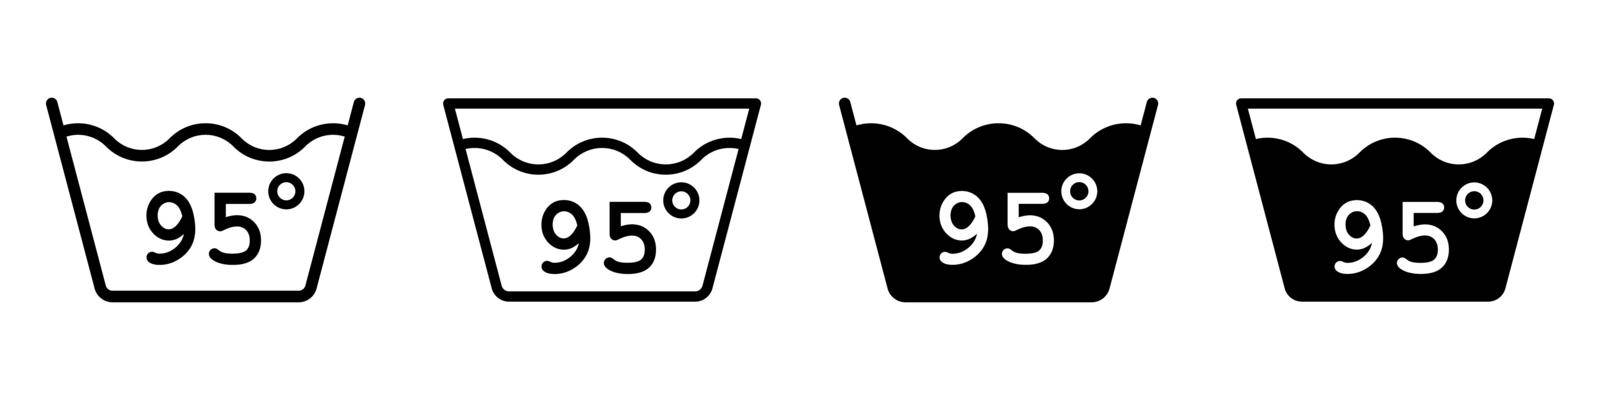 Degrees of water. Wash at a temperature not exceeding 95 degrees. Isolated wash icon. Vector illustration.